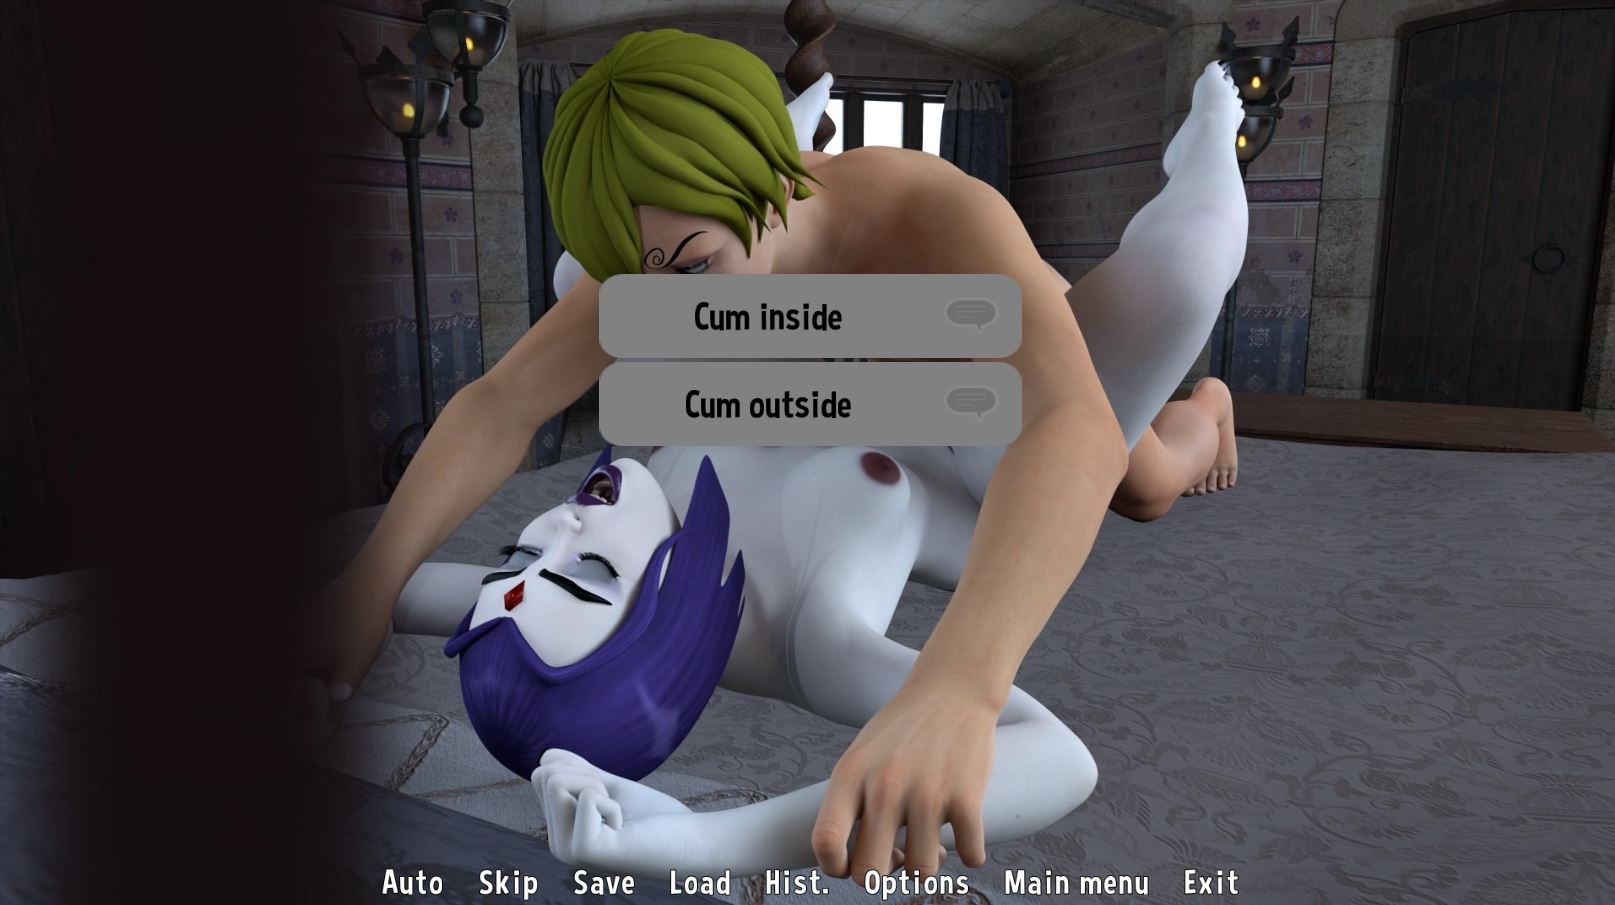 Others] Sanji Fantasy Toon Adventure - v0.14 by Kitoro GAMES 18+ Adult xxx  Porn Game Download